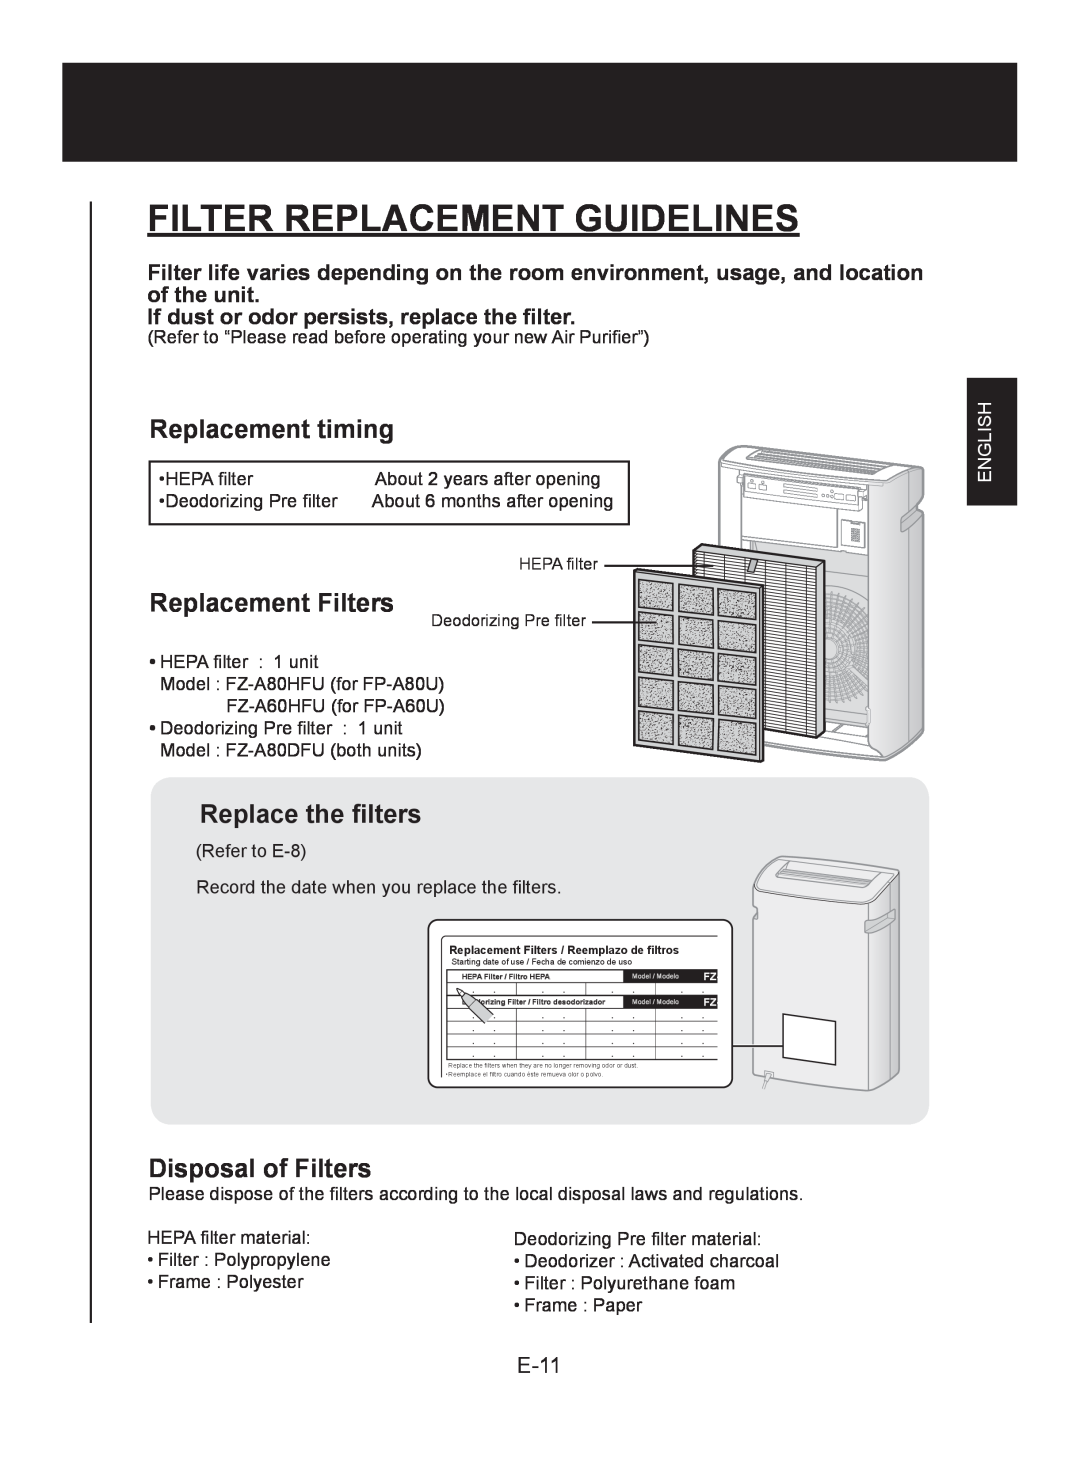 Sharp FP-A80U Filter Replacement Guidelines, Replacement timing, Replacement Filters, Replace the filters, E-11, English 